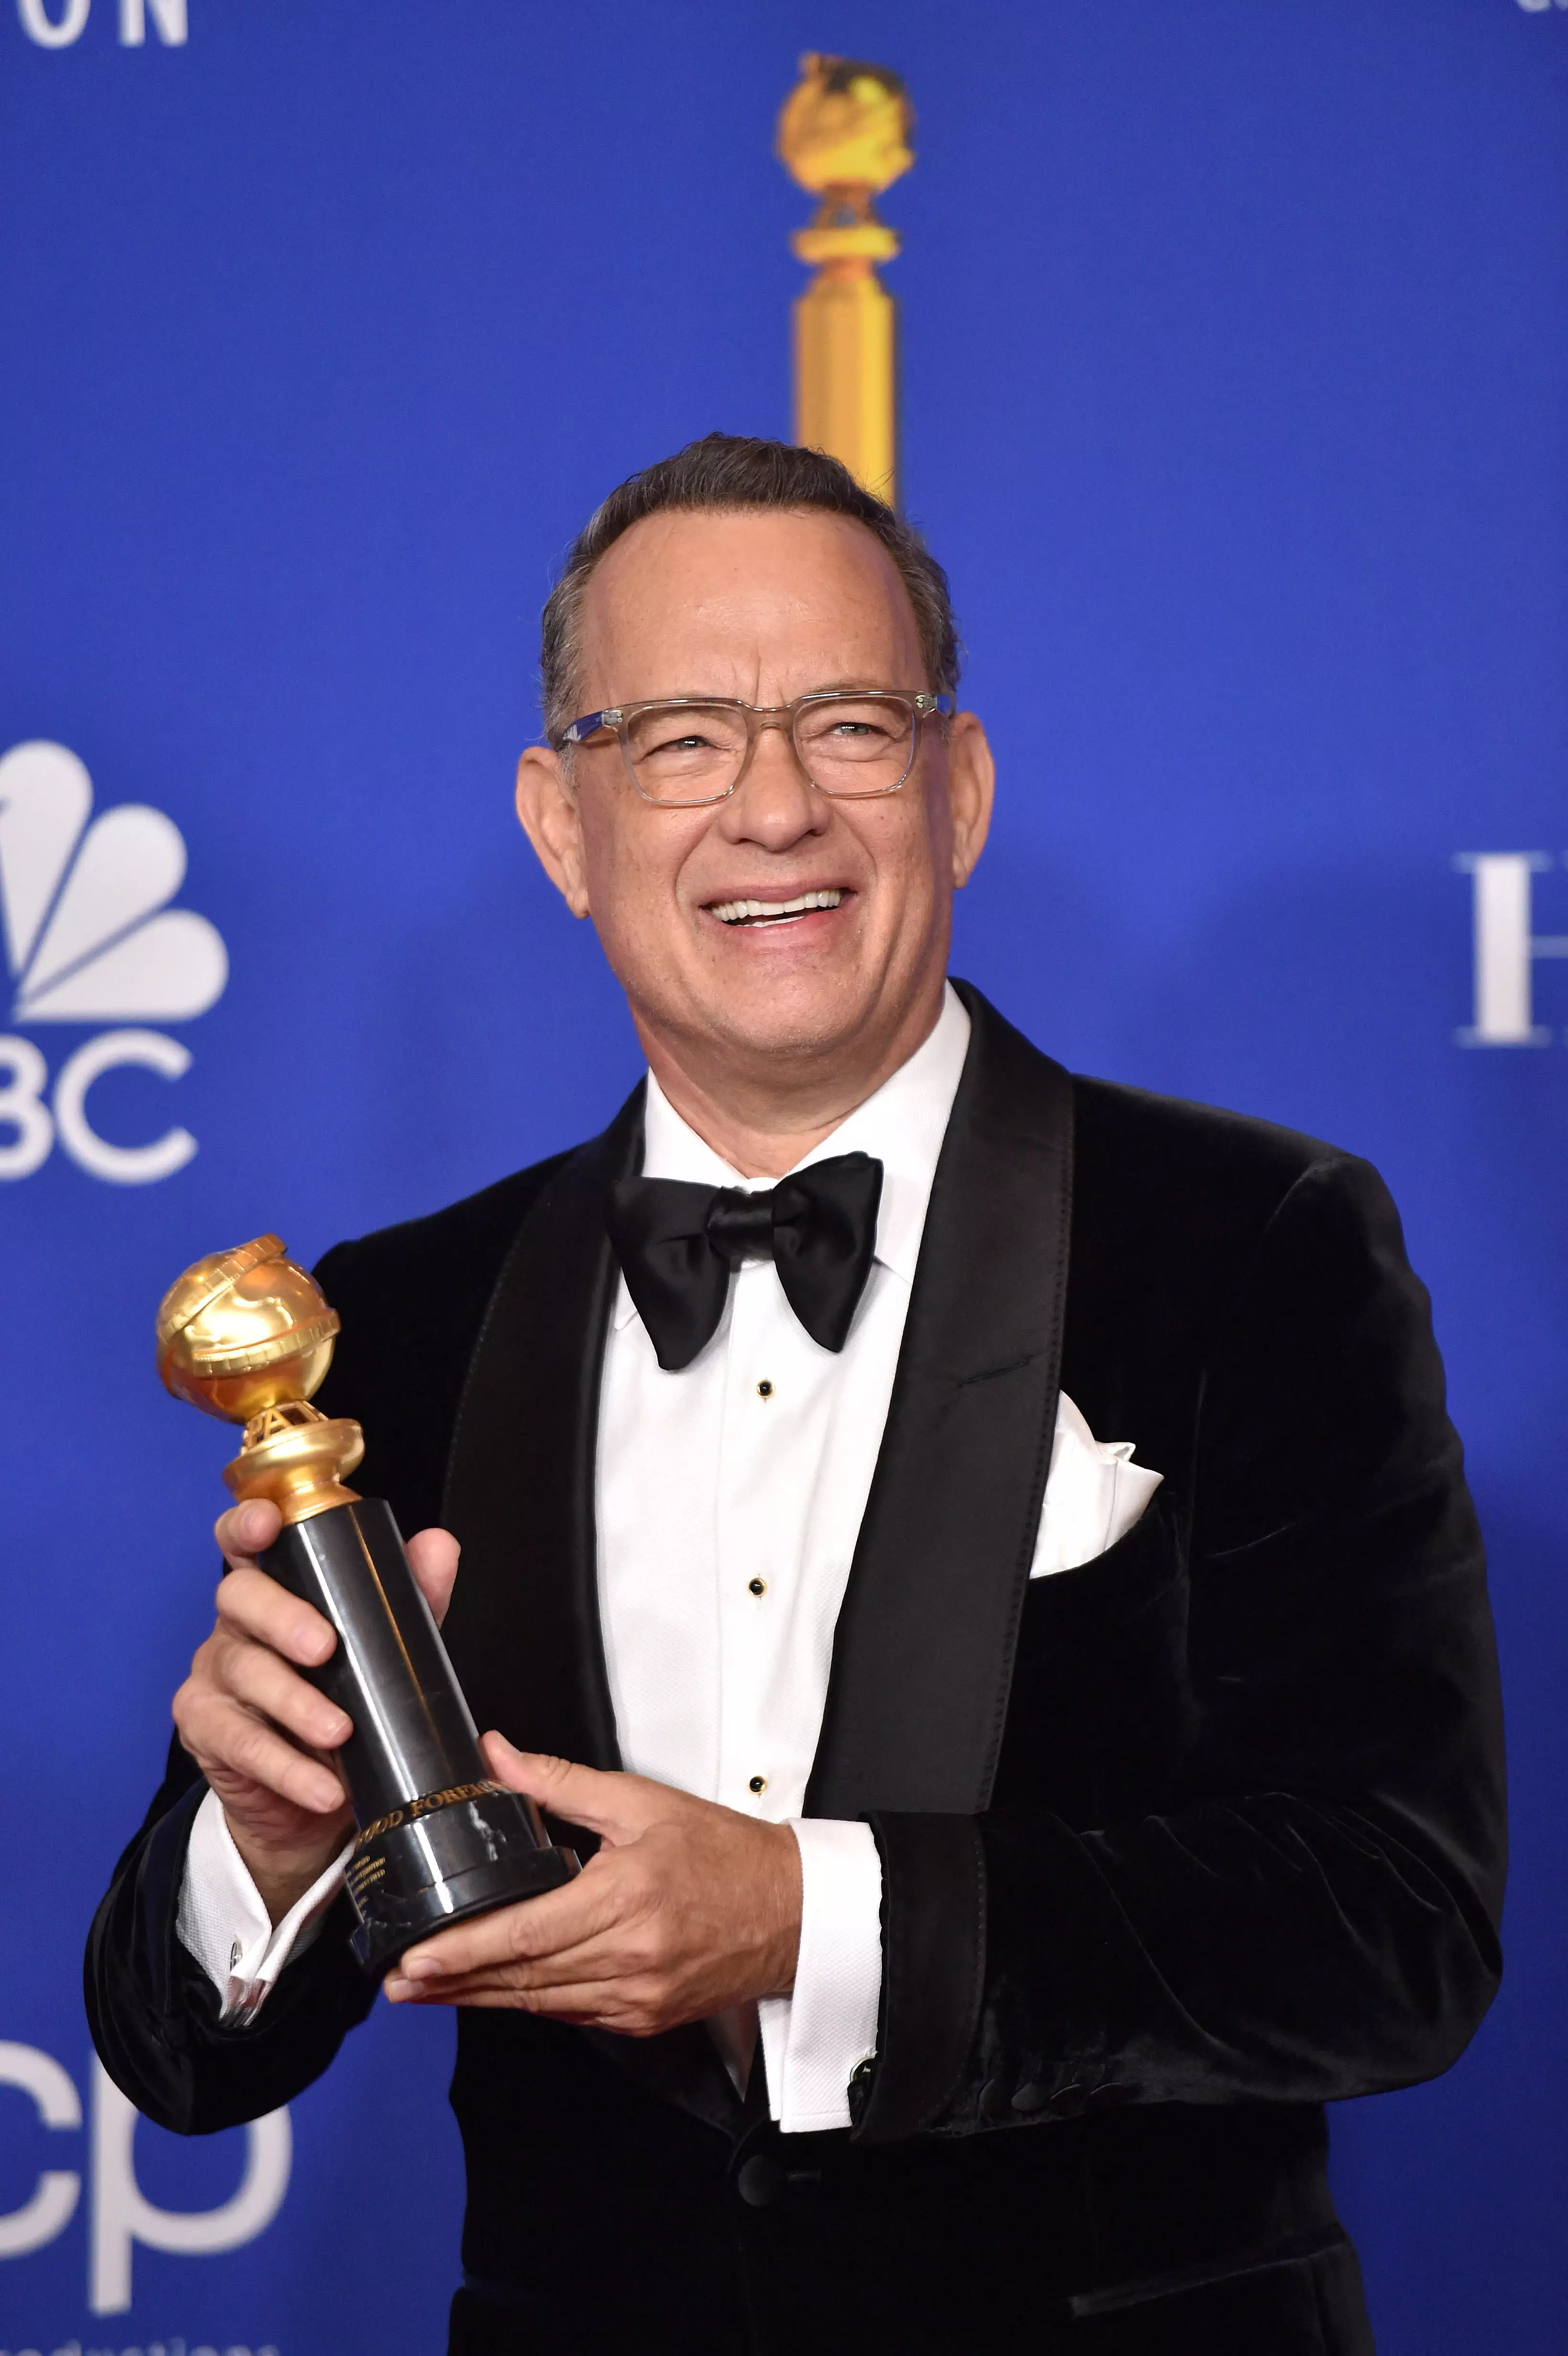 Tom Hanks made a moving speech for graduates at Wright State University.